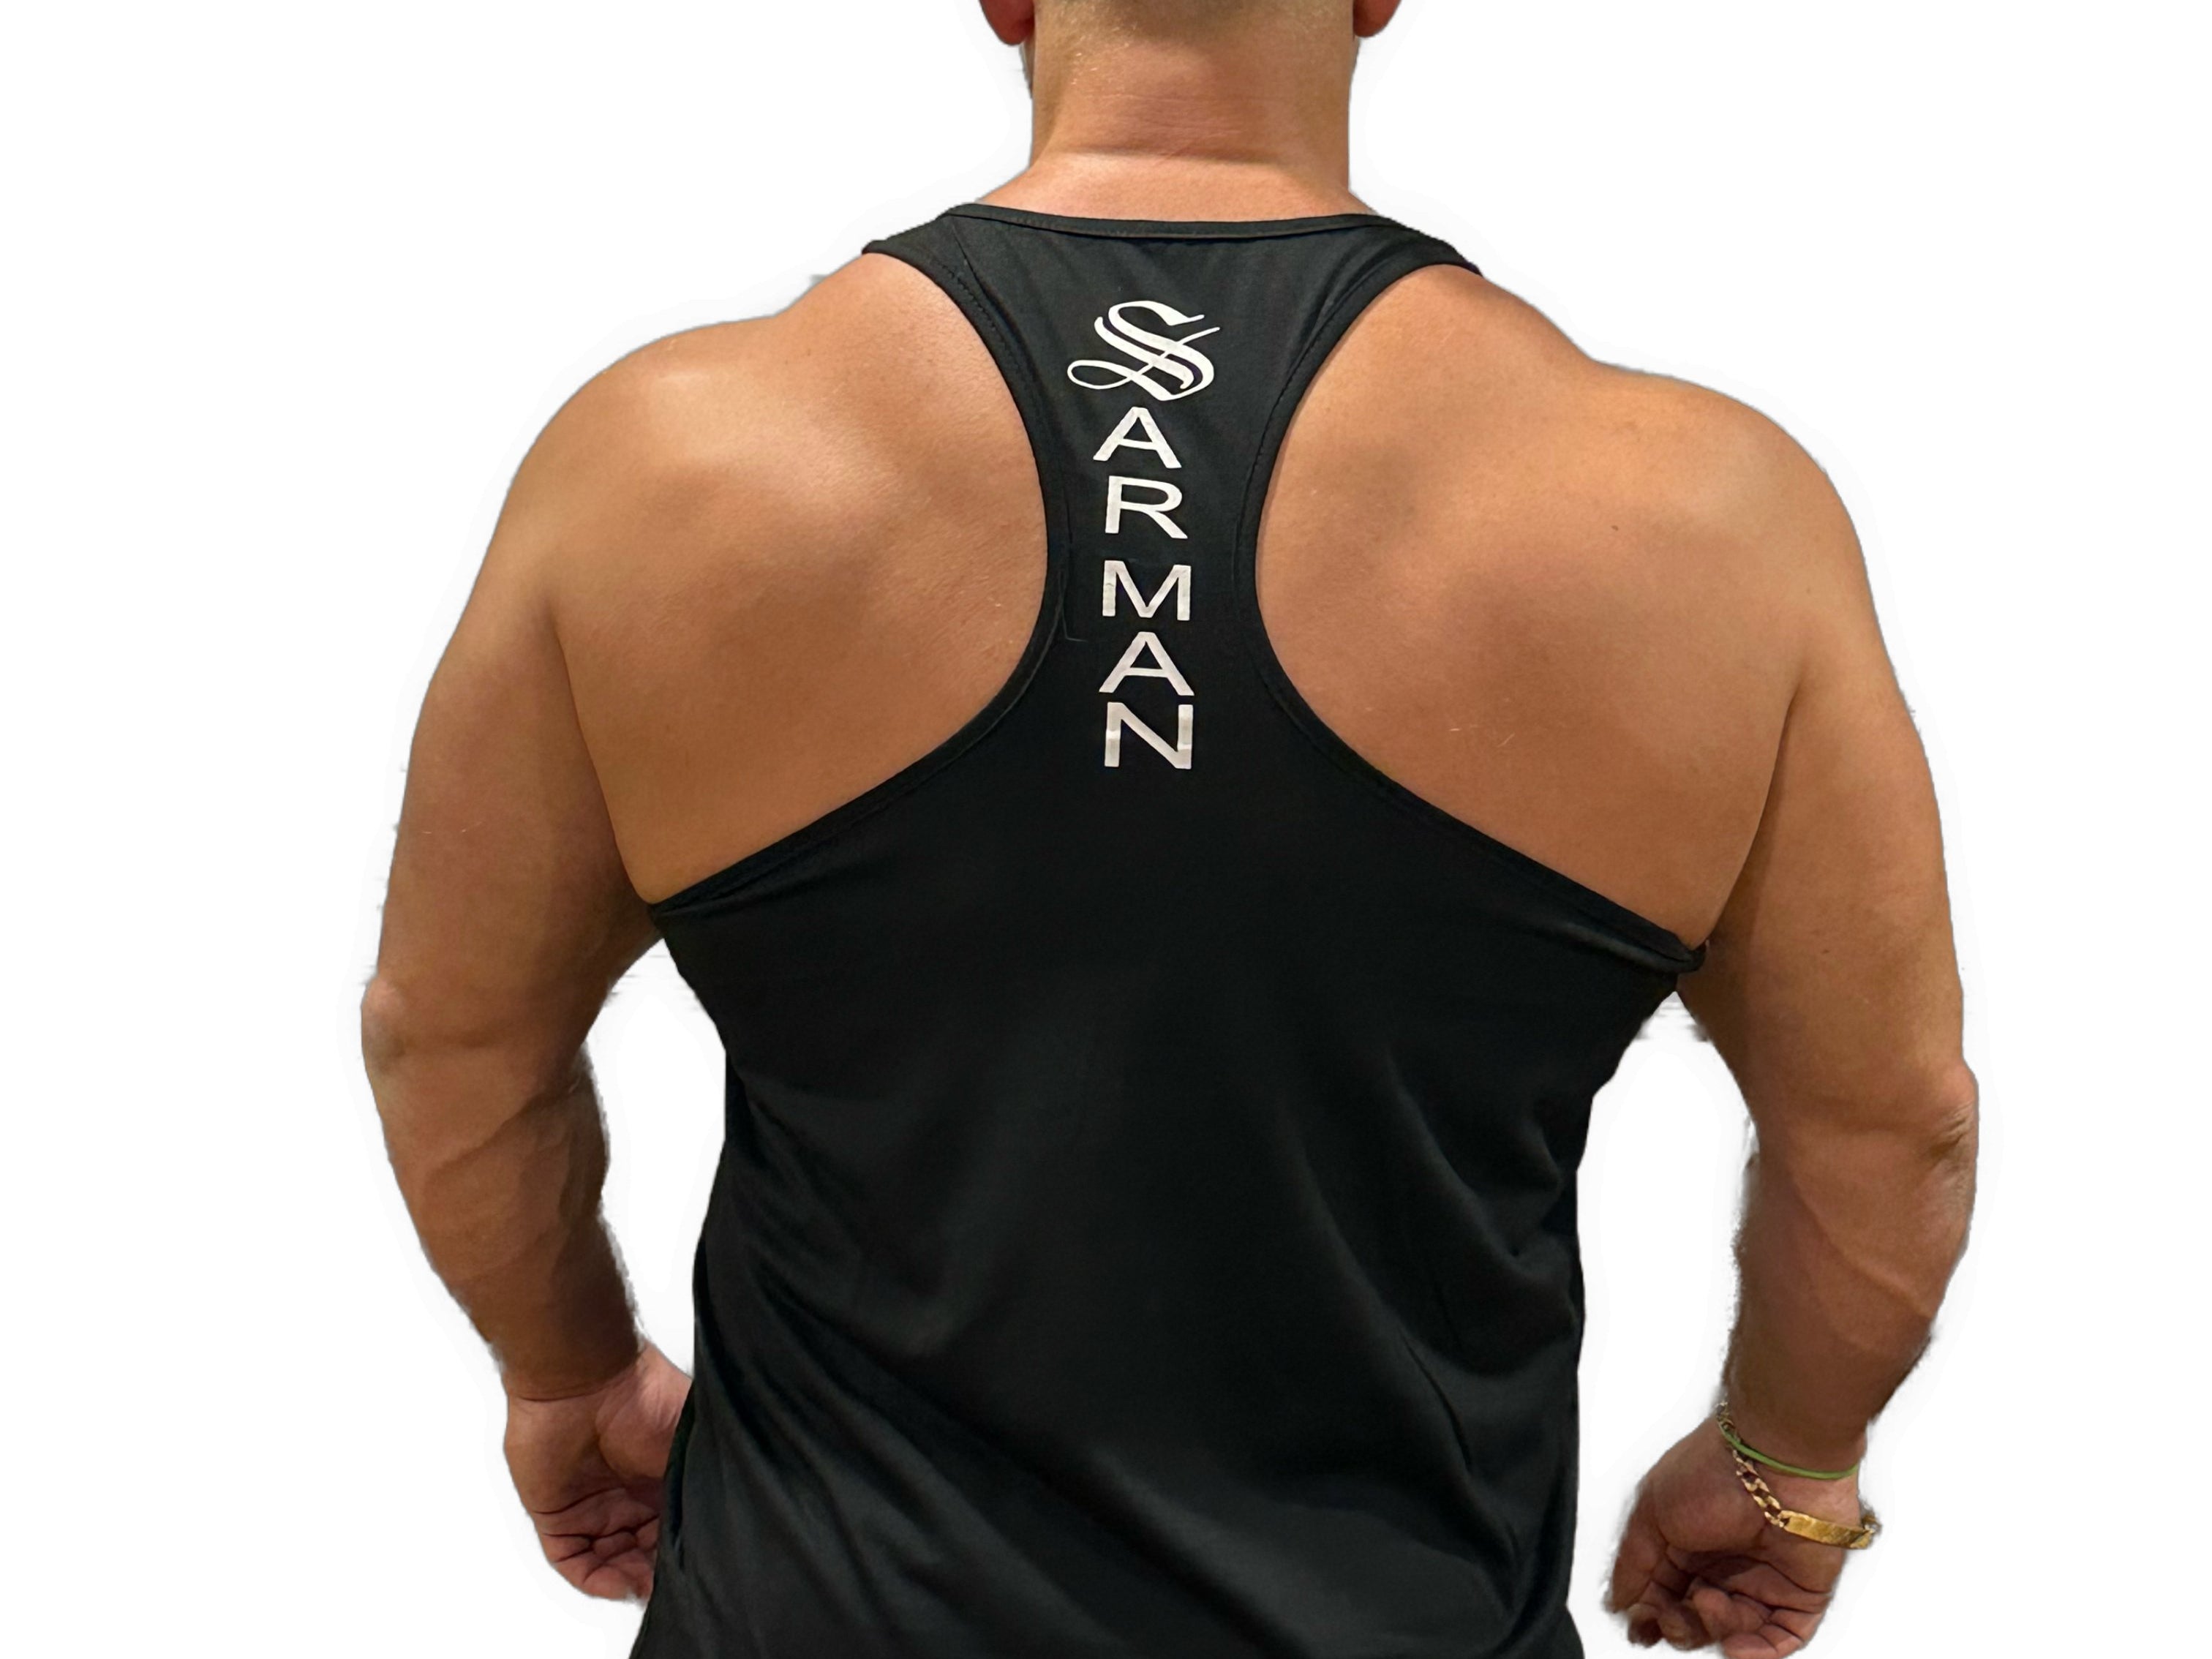 Power X - Black Tank Top for Men - Sarman Fashion - Wholesale Clothing Fashion Brand for Men from Canada